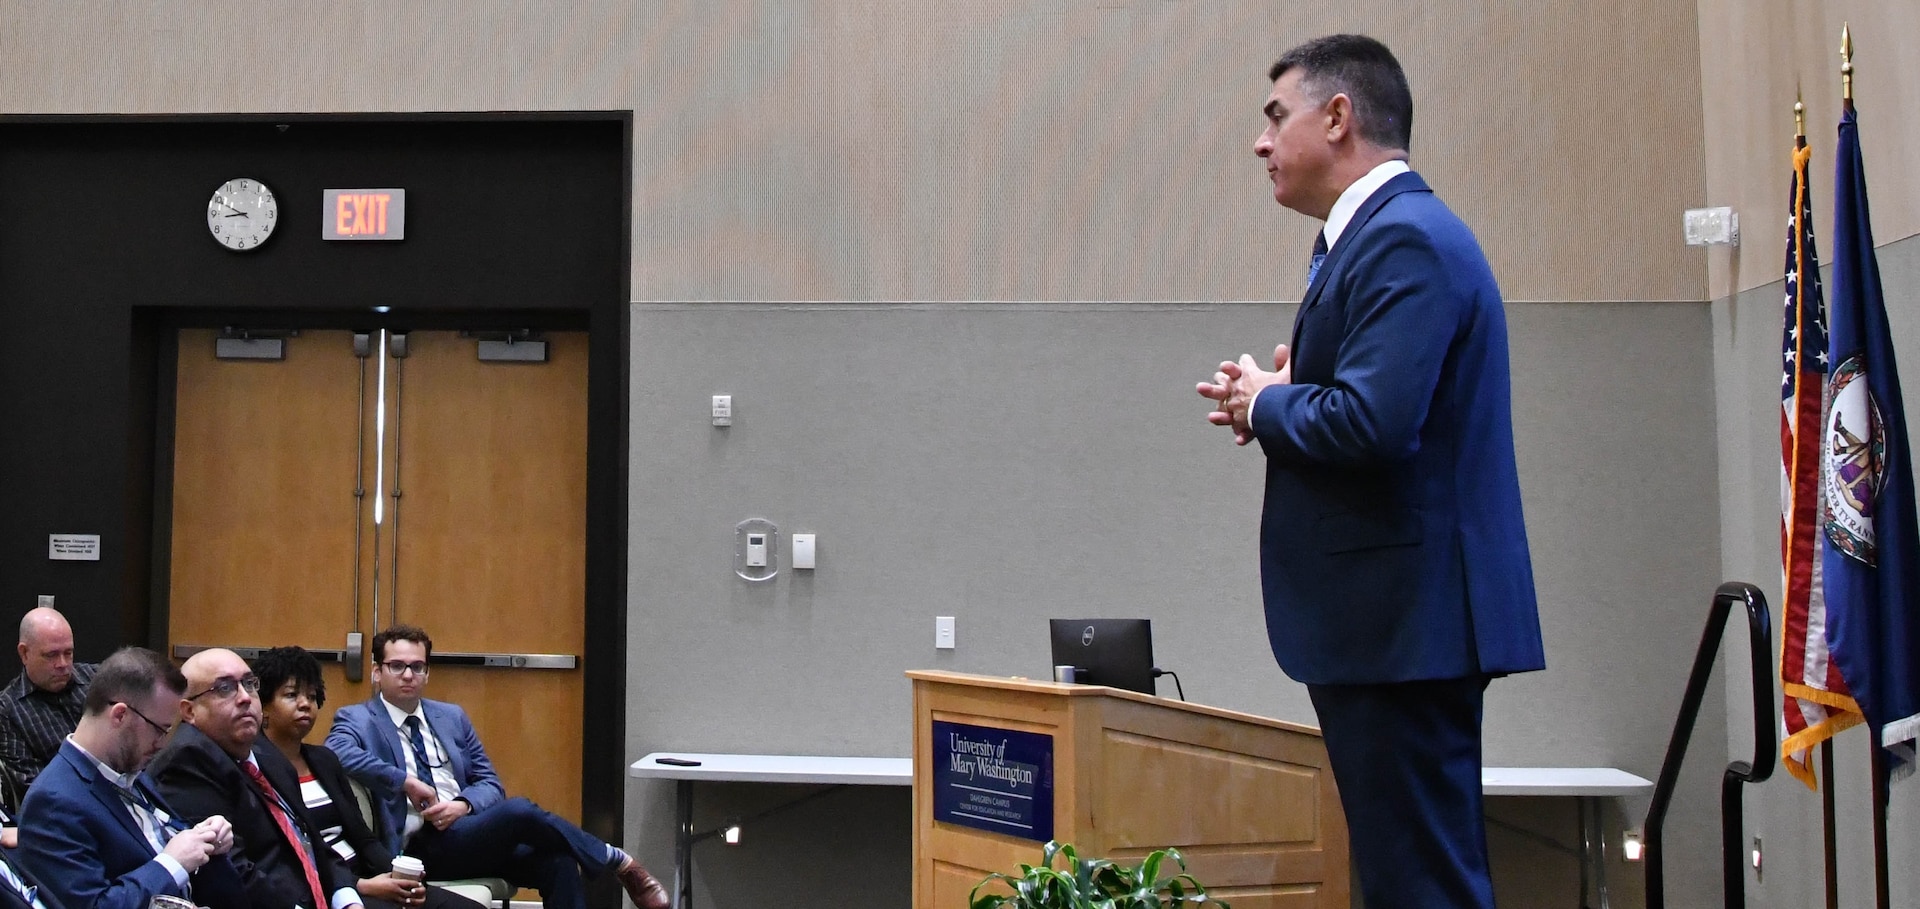 IMAGE: Naval Surface Warfare Center Dahlgren Division (NSWCDD) Technical Director Dale Sisson Jr., SES, addresses the crowd with opening remarks at the NSWCDD Modeling and Simulation (M&S) Community of Interest M&S Summit July 25 at University of Mary Washington’s Dahlgren Campus.